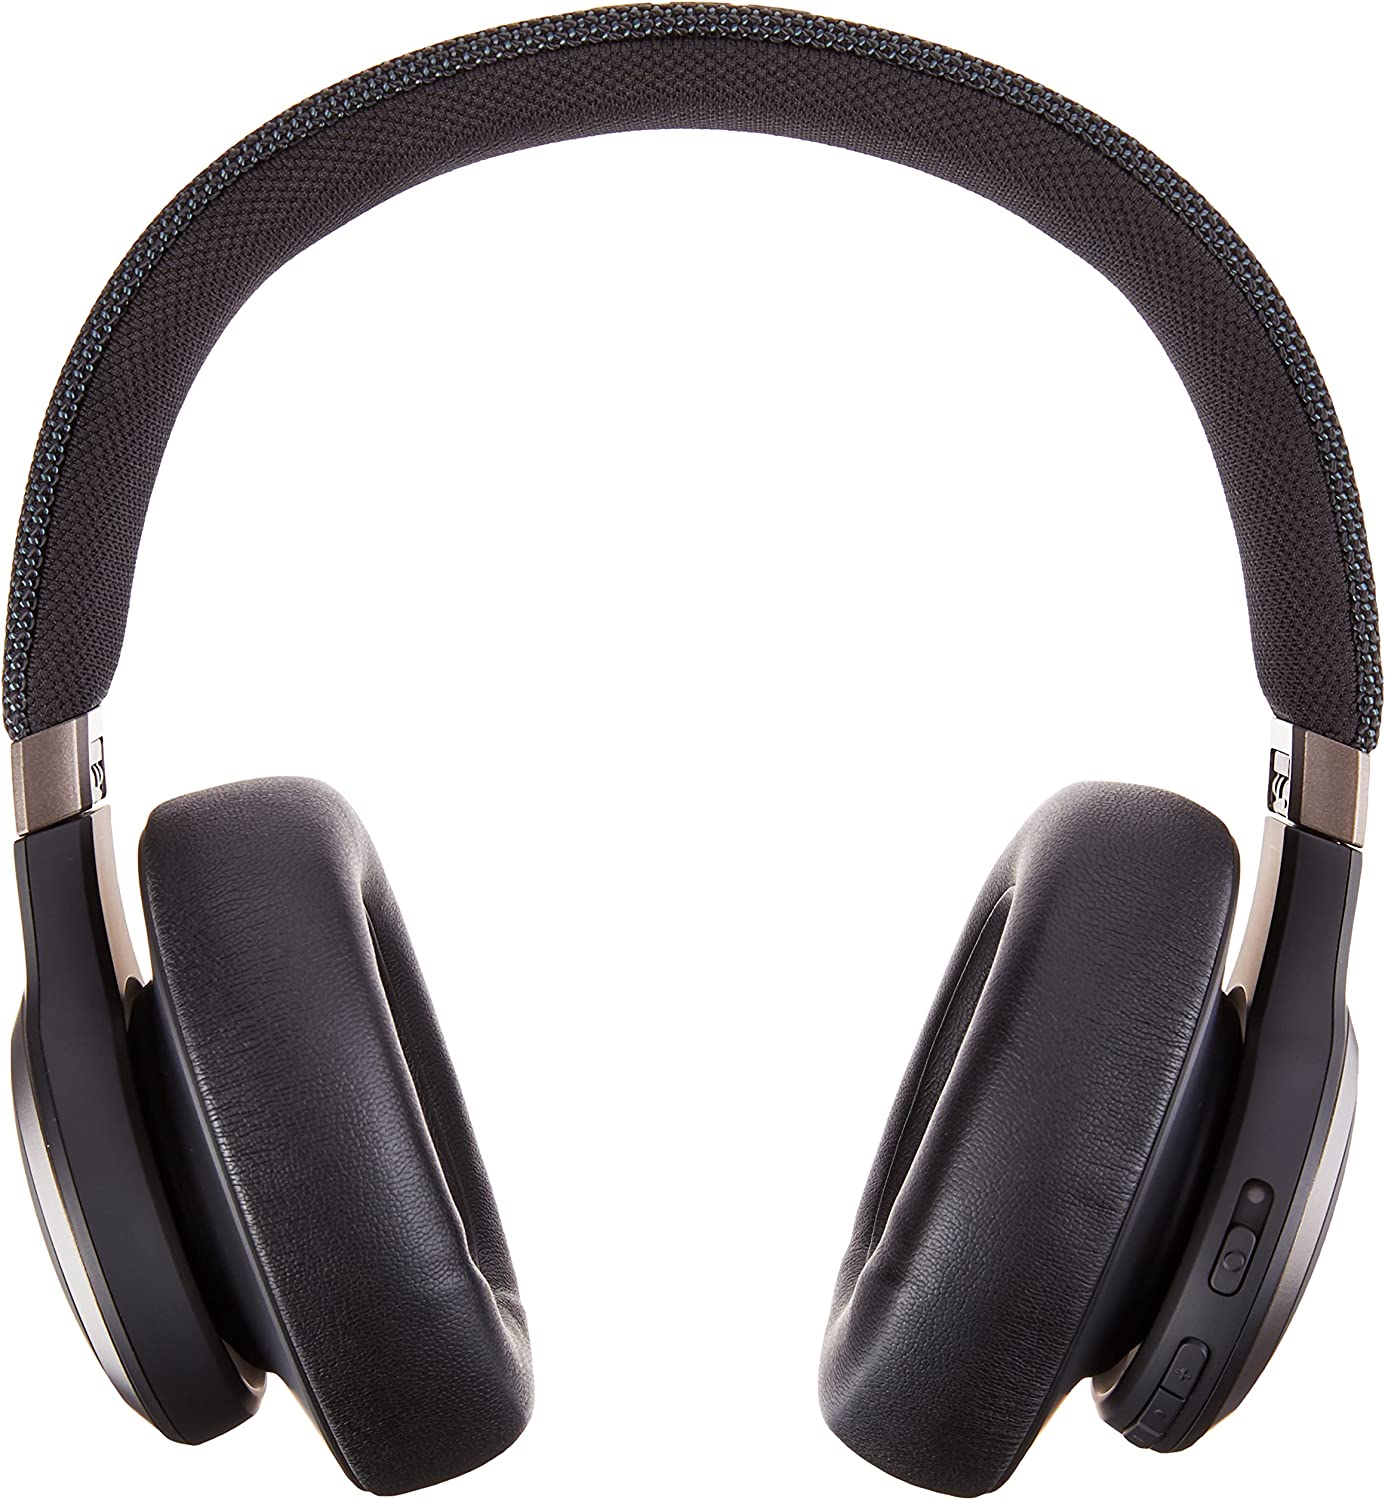 JBL Live 650BTNC Headphones, Black - Wireless Over-Ear Bluetooth Headphones - Up to 20 Hours of Noise-Cancelling Streaming - Includes Multi-Point Connection & Voice Assistant